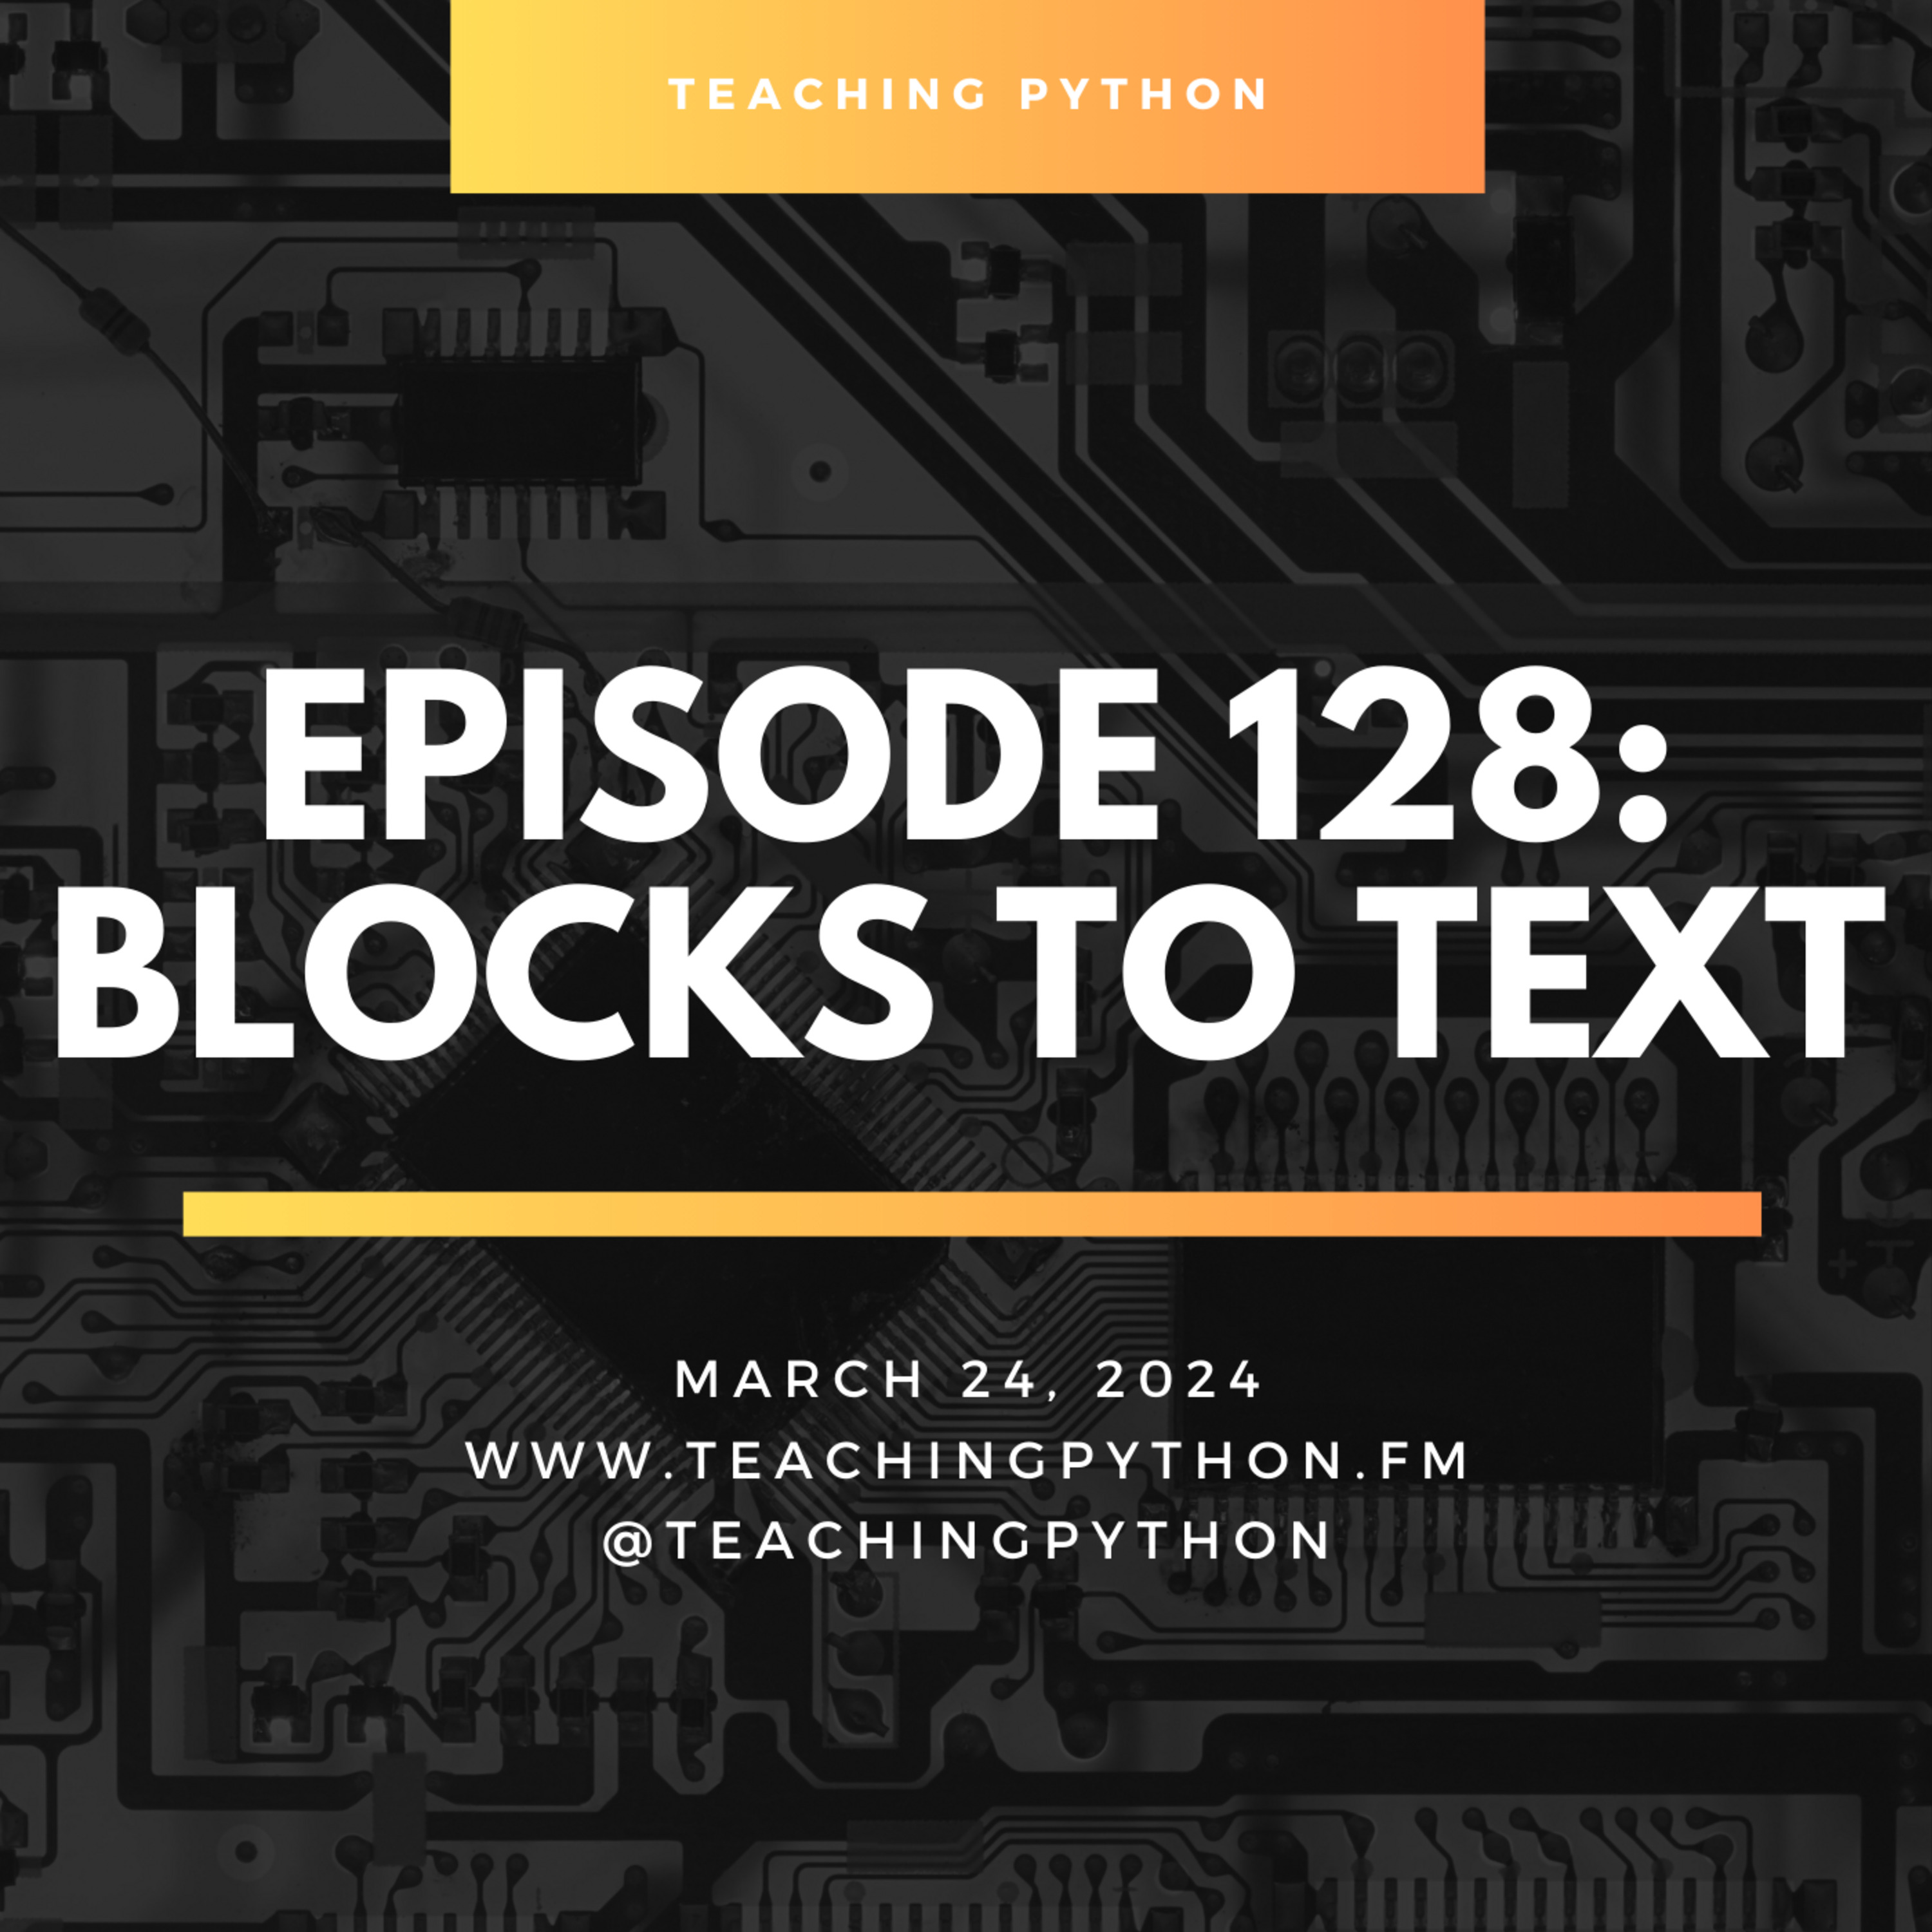 Episode 128: From Blocks to Code with PickCode